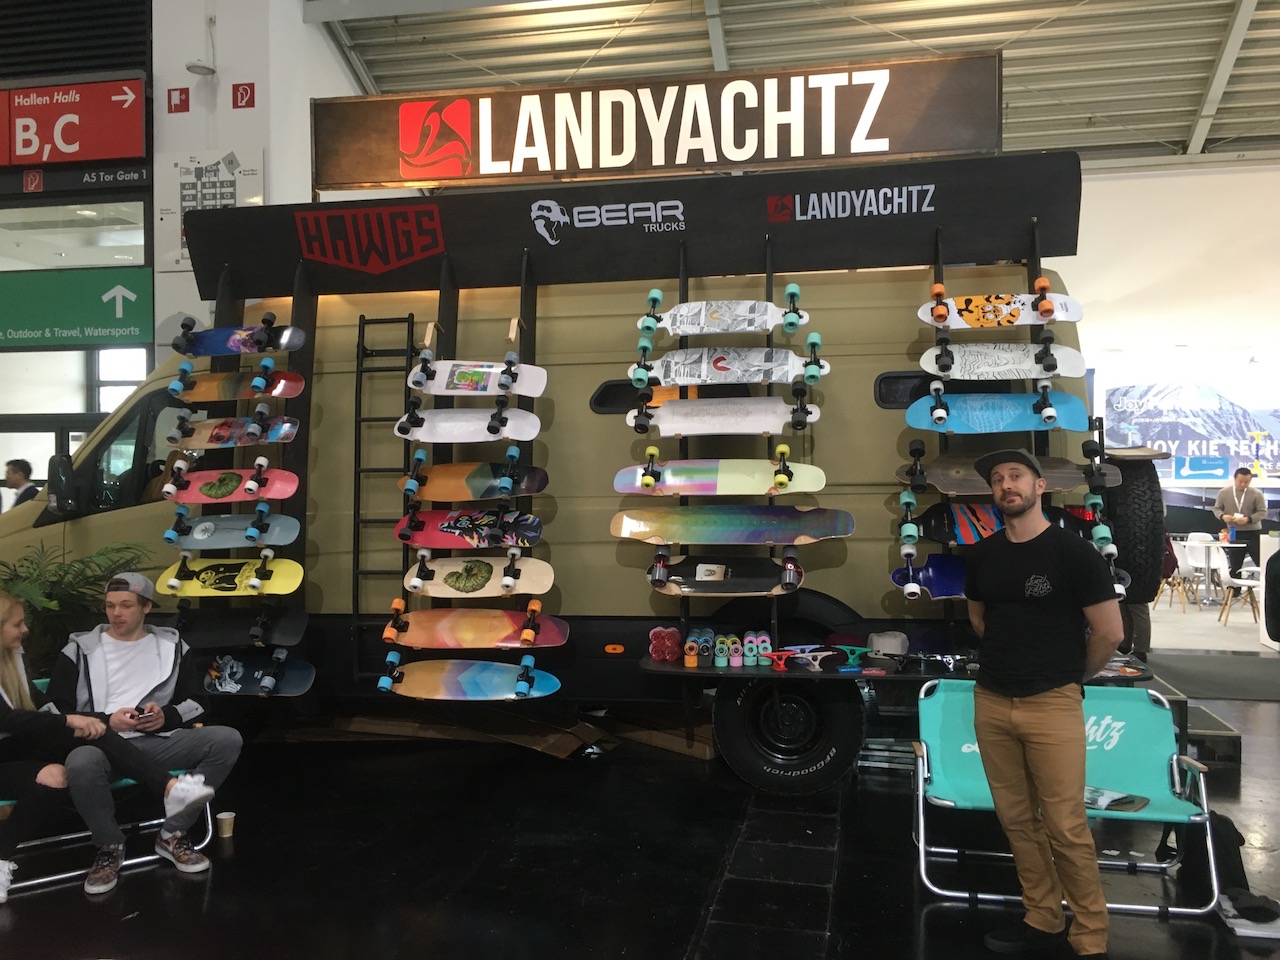 Landyachtz booth at the Longboard embassy built on their local reps truck